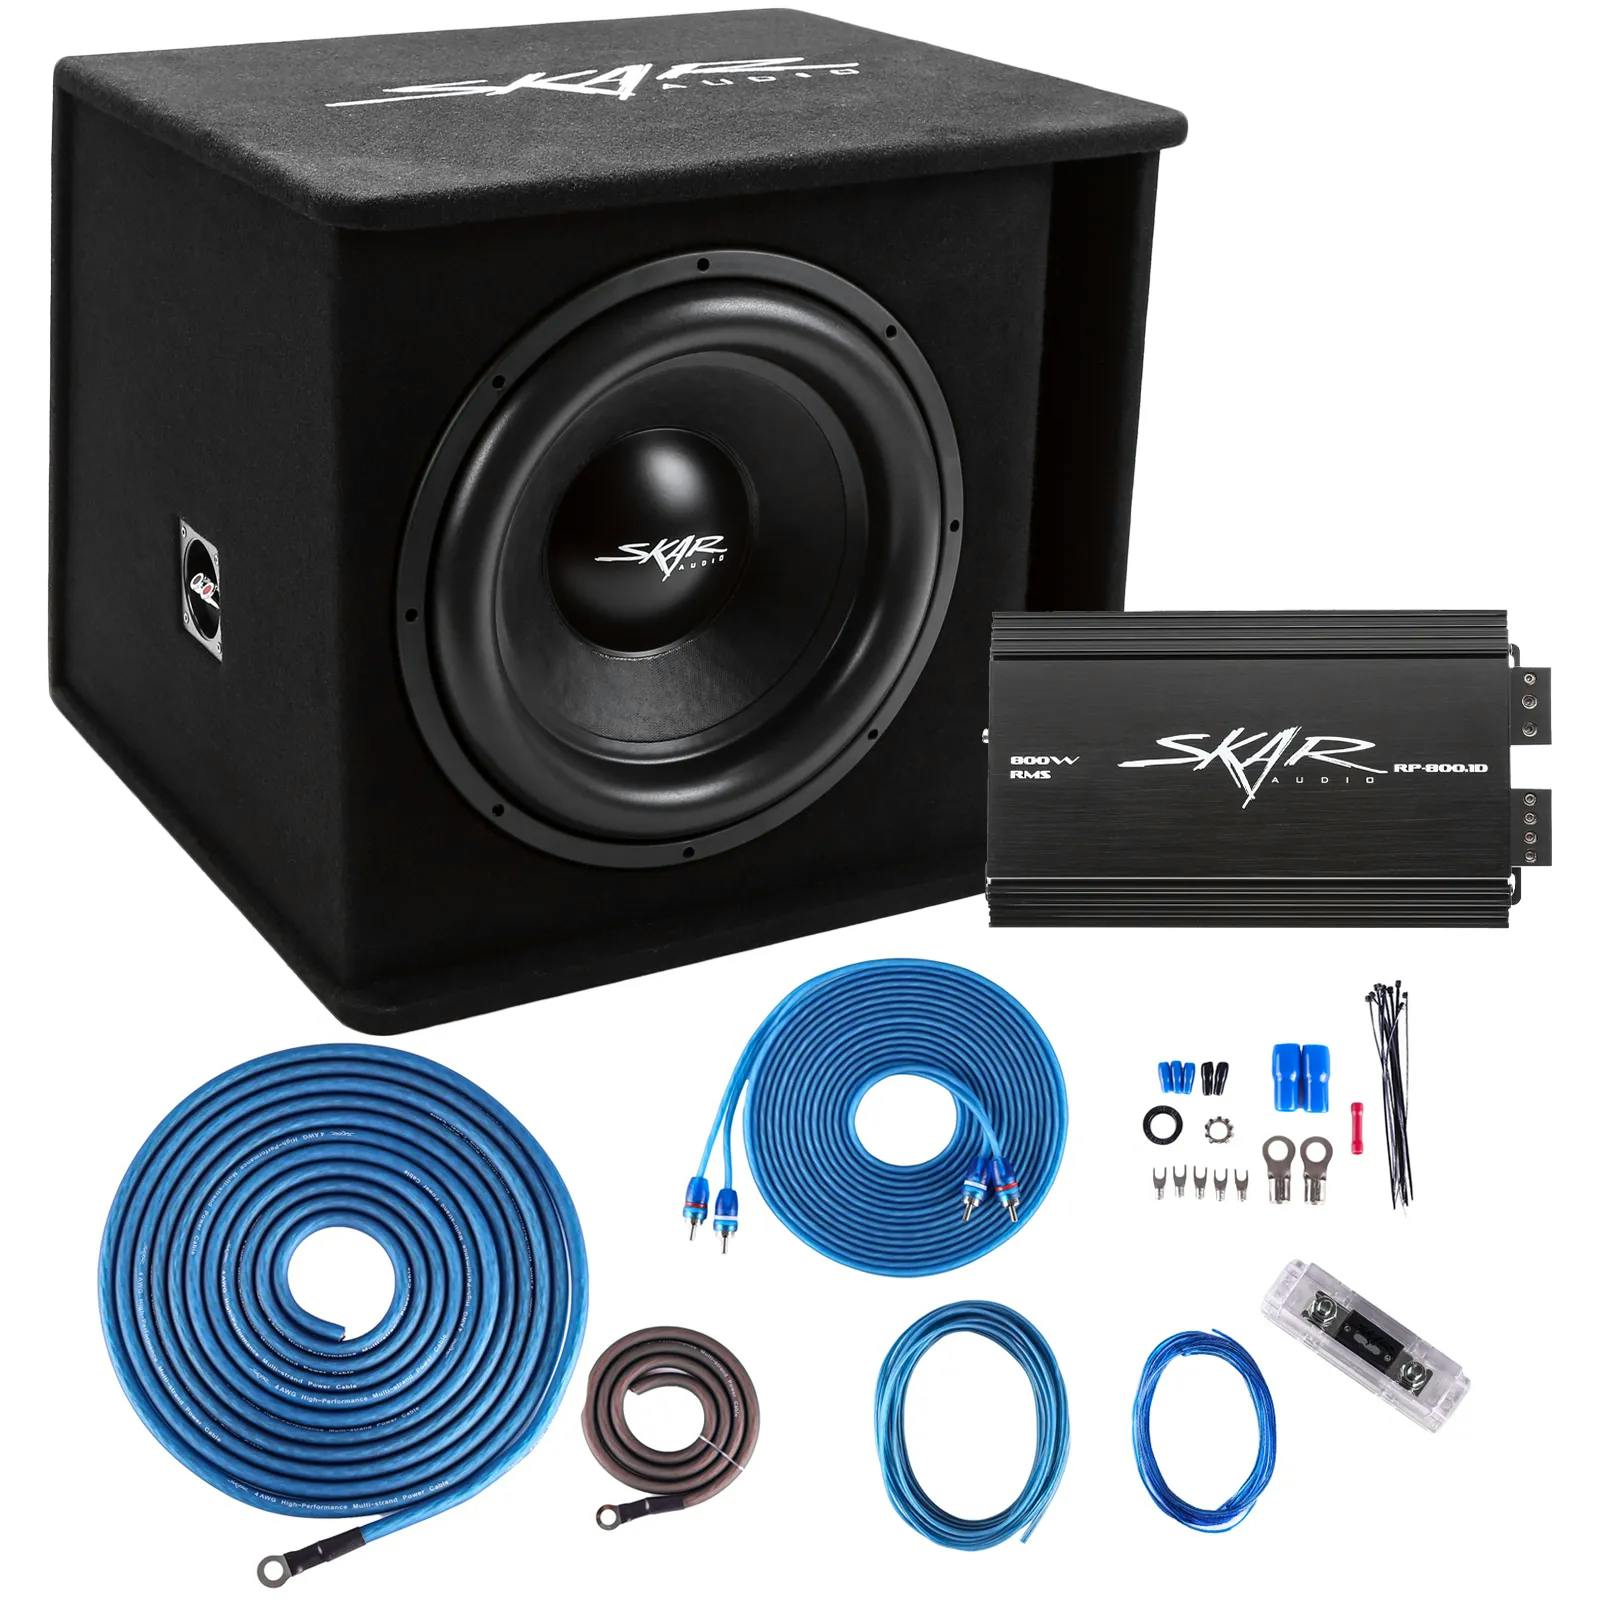 Featured Product Photo for Single 15" 1,200 Watt SDR Series Complete Subwoofer Package with Vented Enclosure and Amplifier